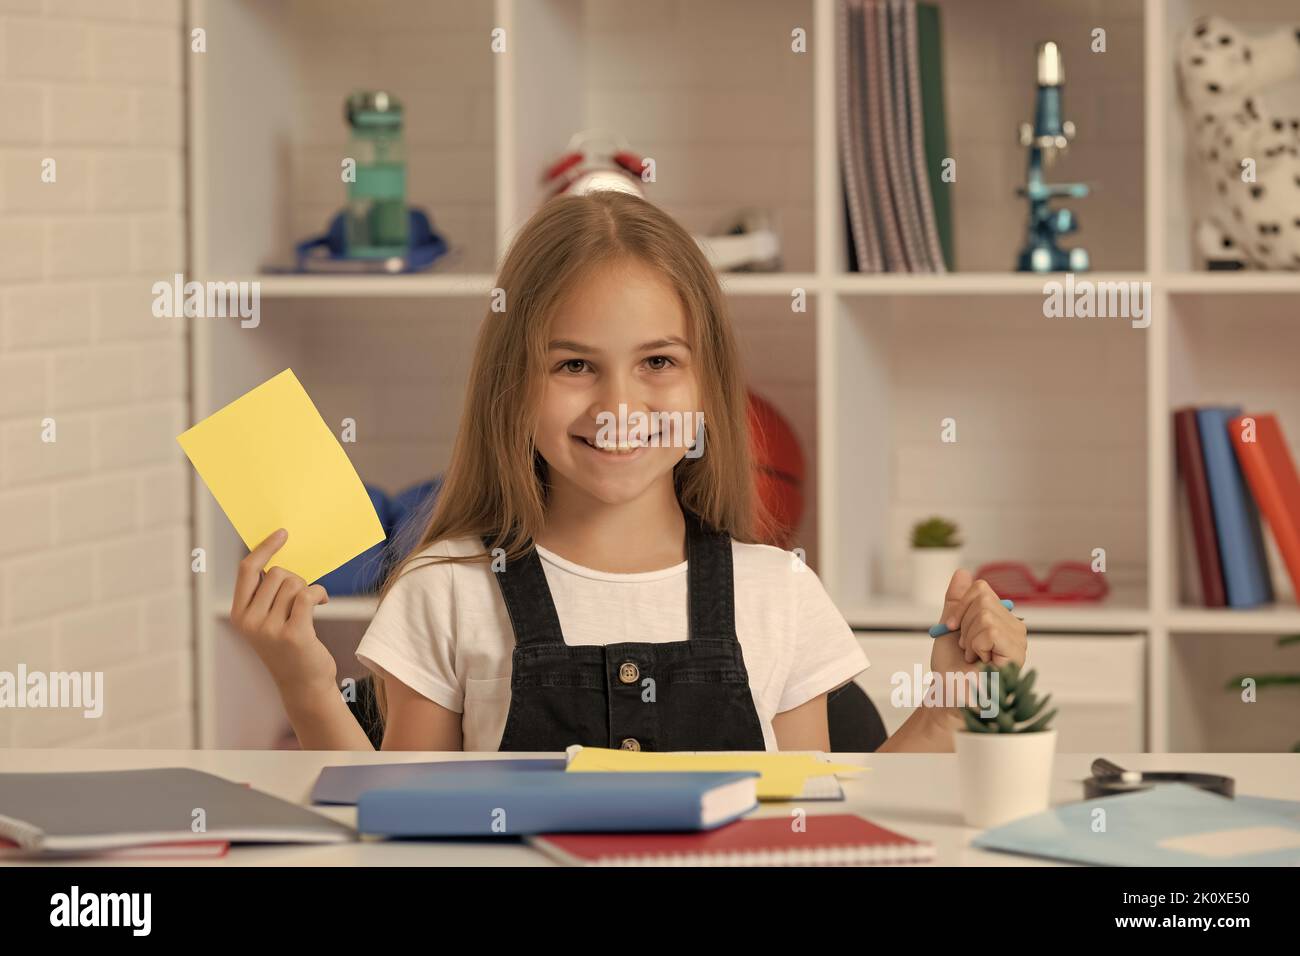 happy child holding paper and scissors in school classroom Stock Photo